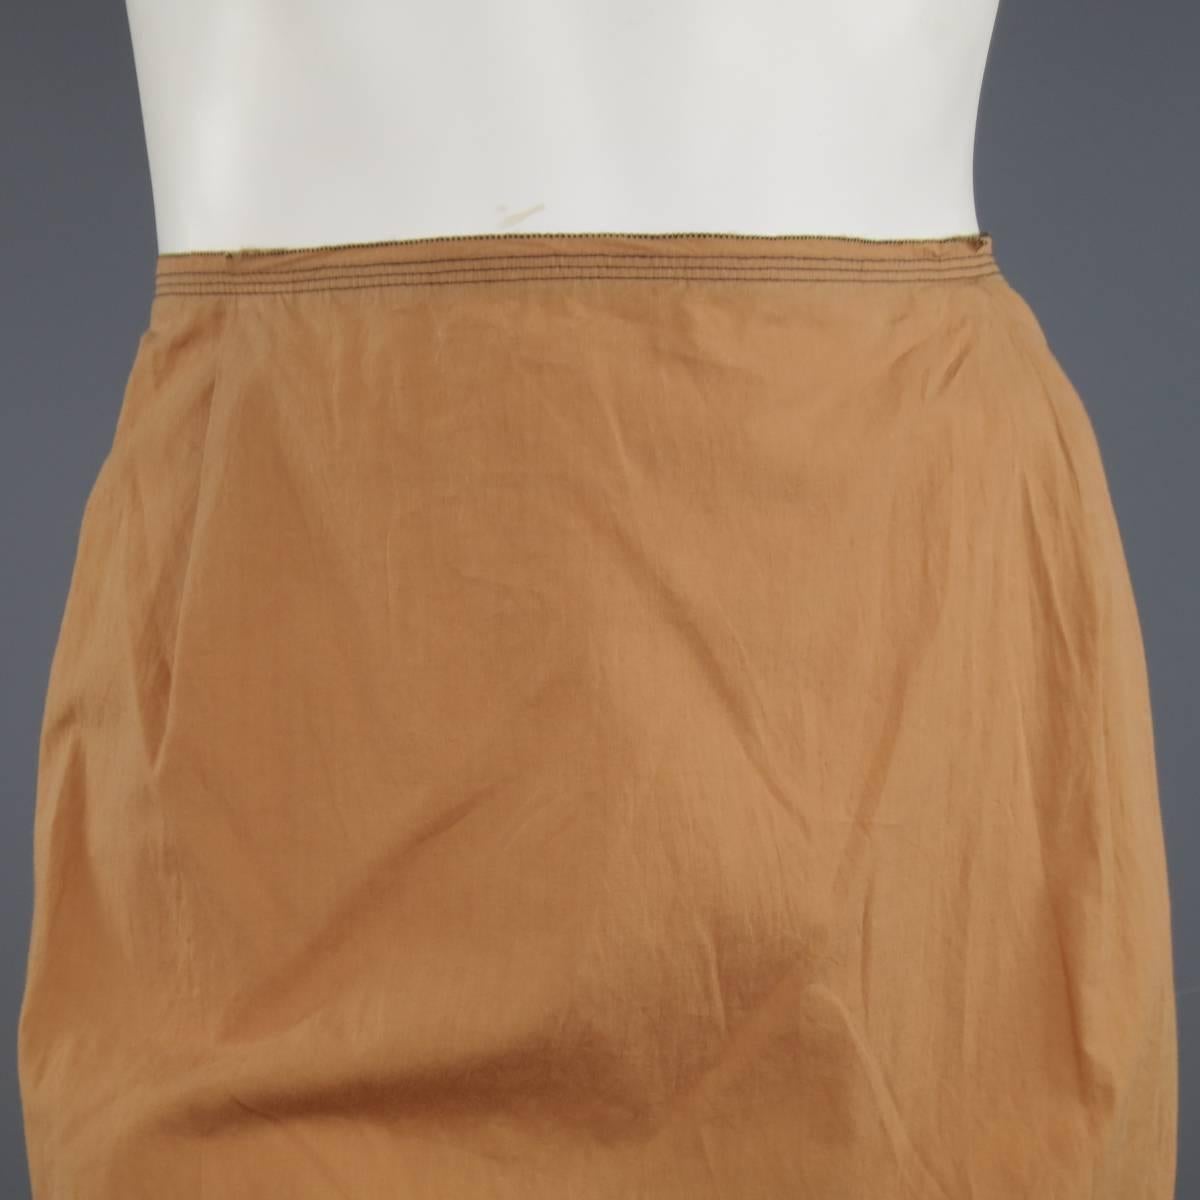 PRADA A-line, cotton, dip-dye skirt in a muted peach color with black tie dye edging and pleat dart details. Skirt is unlined with three snap closure. Made in Italy.
 
Excellent Pre-Owned Condition.
Marked: 40
 
Measurements:
 
Waste: 28 In.
Hips: